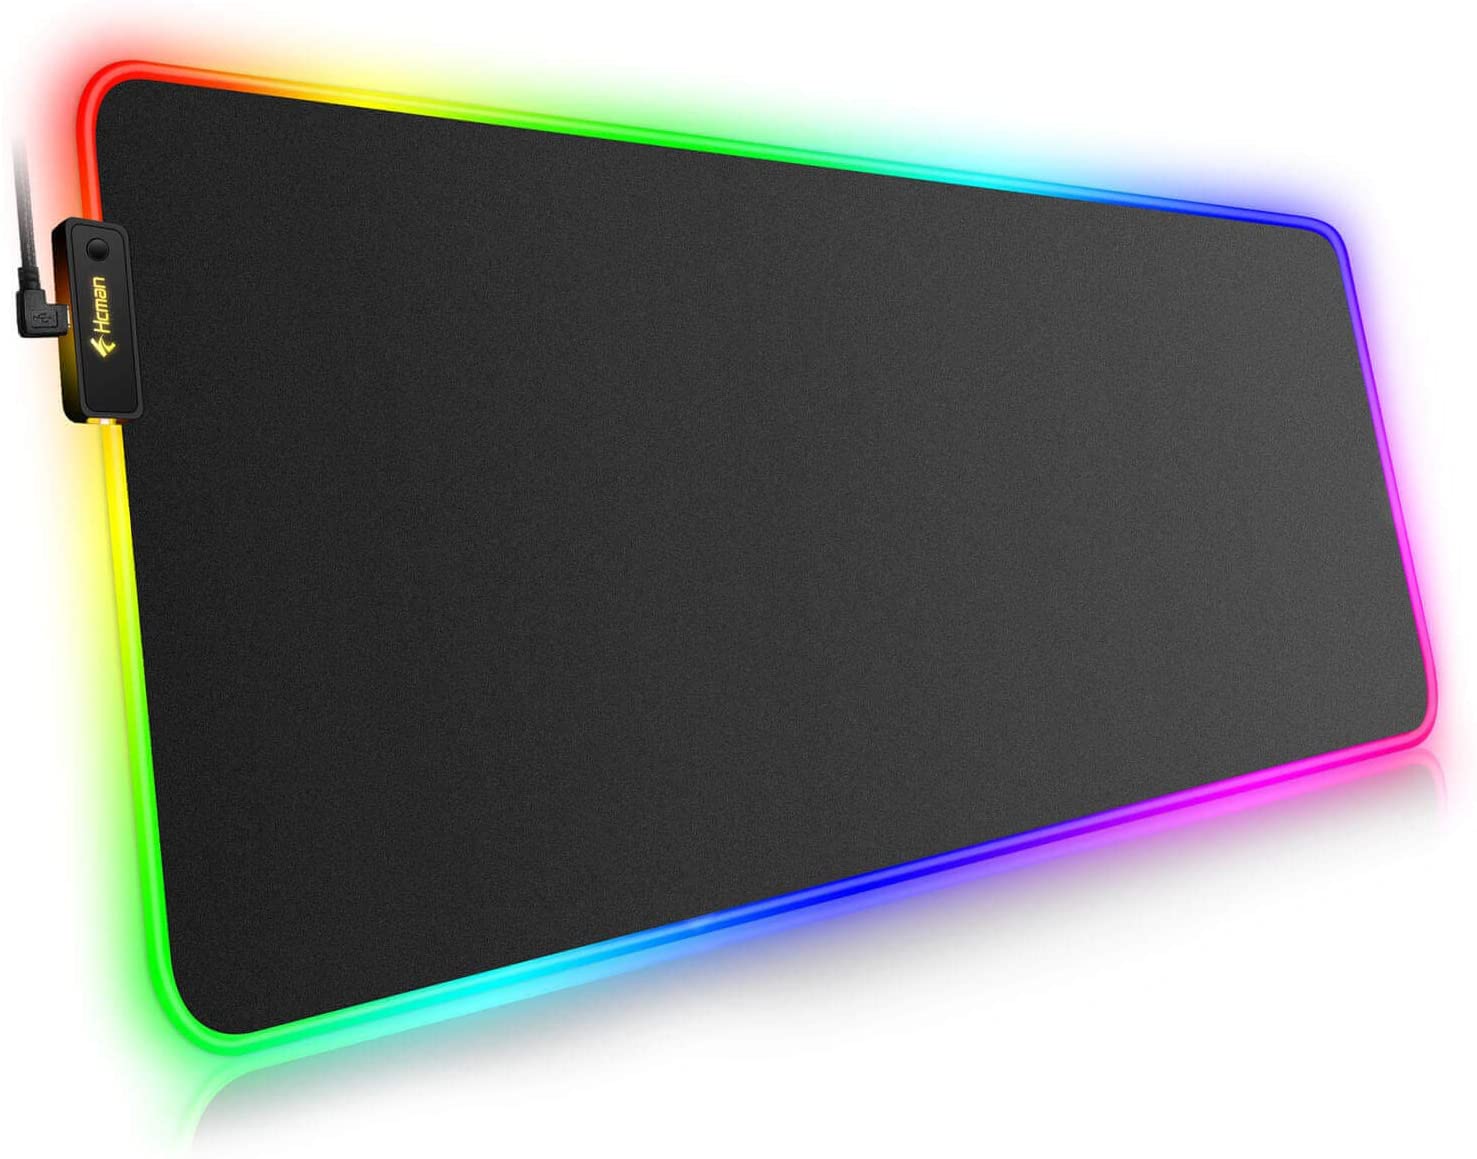 rgb_gaming_mouse_pad_large_8003004mm_led_mousepad_with_non-slip_rubber_base_soft_pad1624520724.jpg